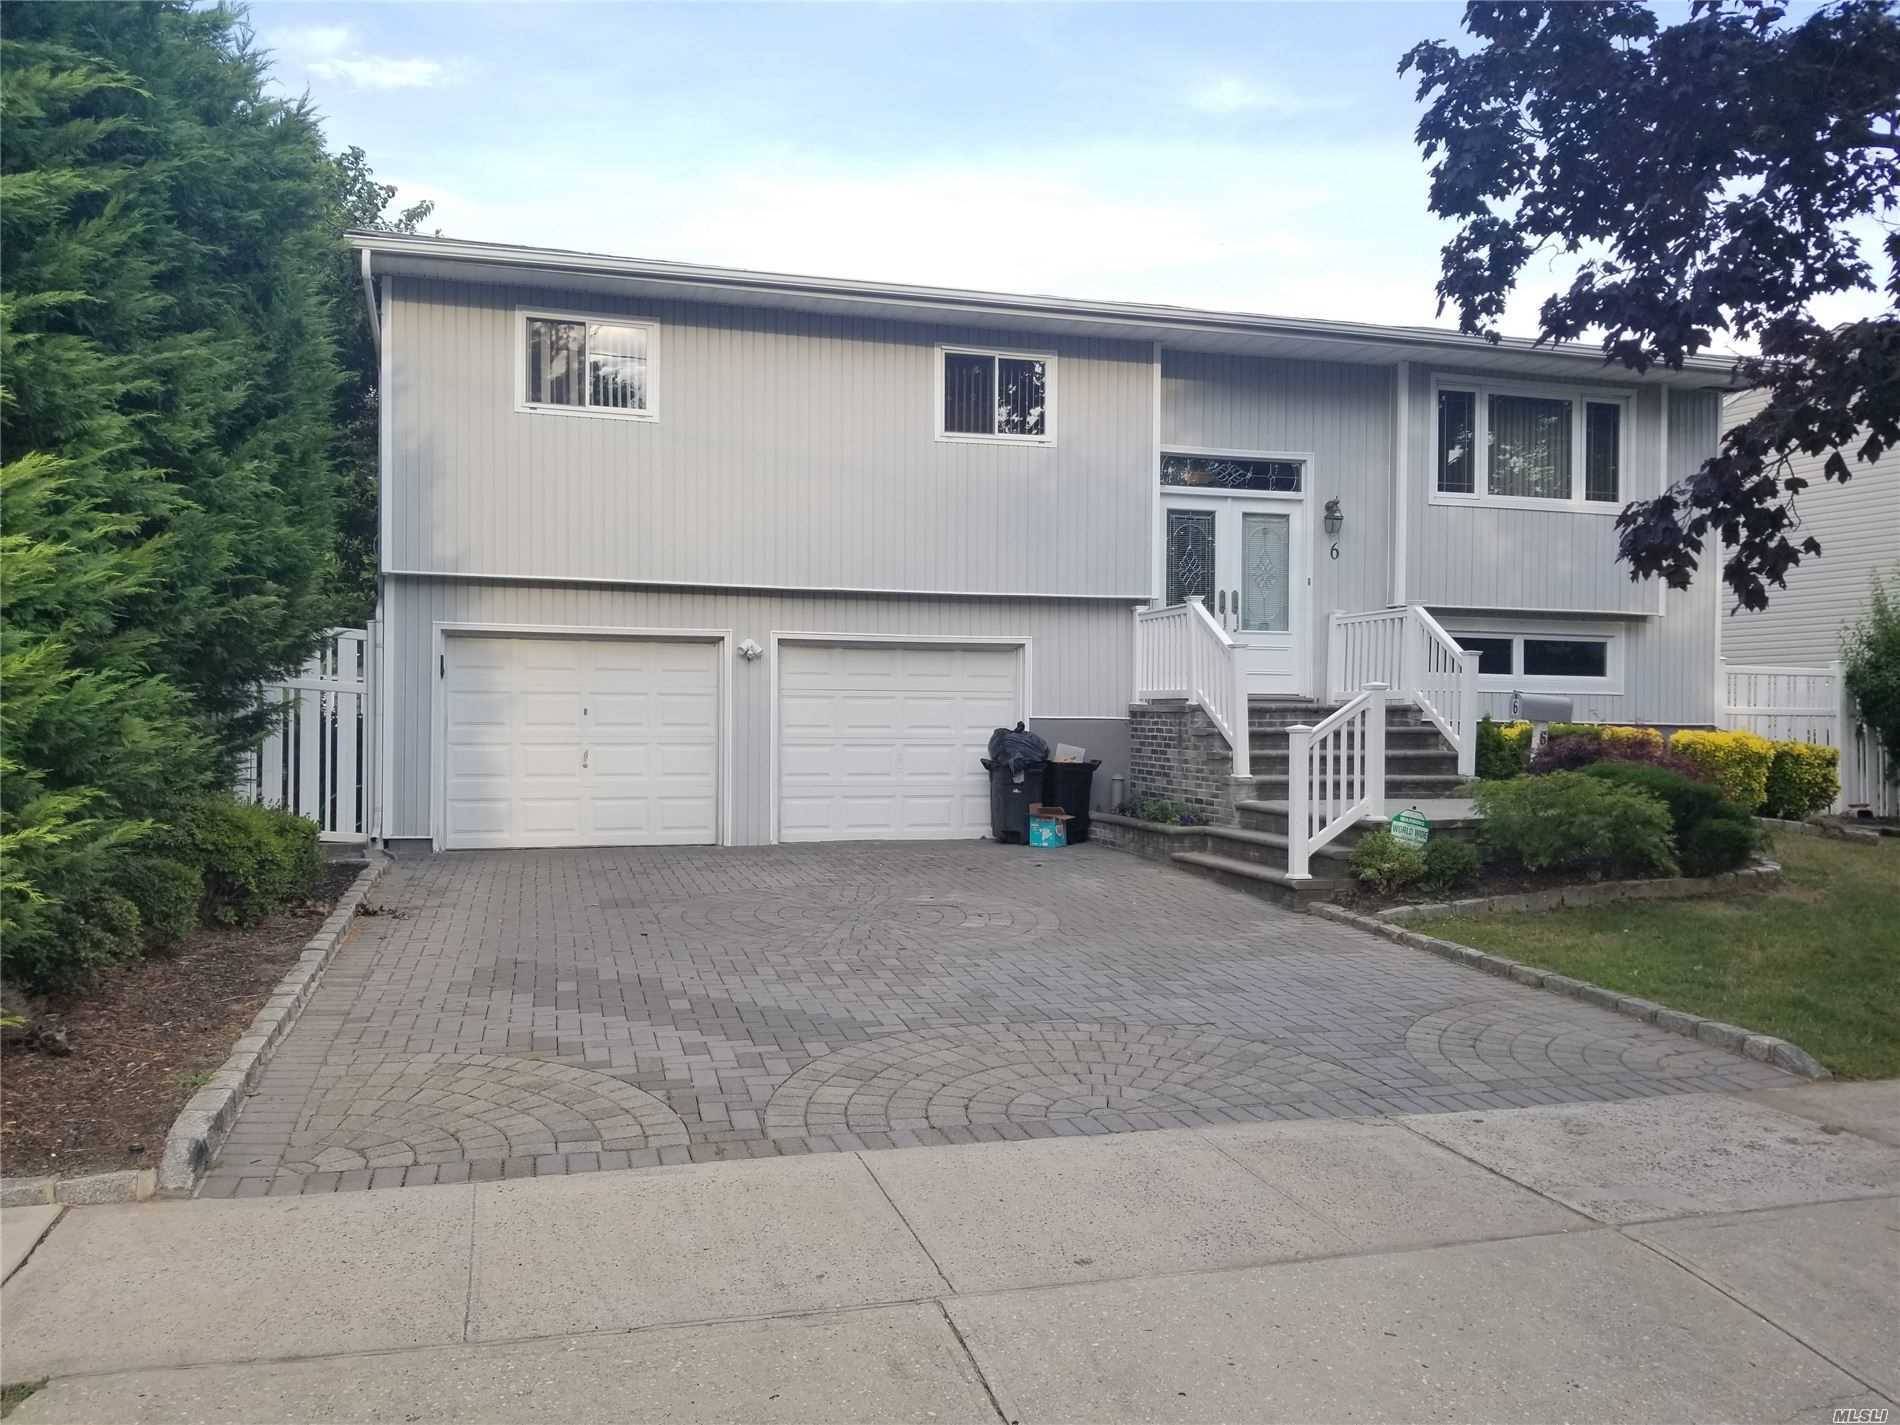 Lovely Hi ranch on a quiet street 4 bedroom amp ; 2 baths, new kitchen with a large window, access to the deck from the dining room, hardwood floor throughout, ...